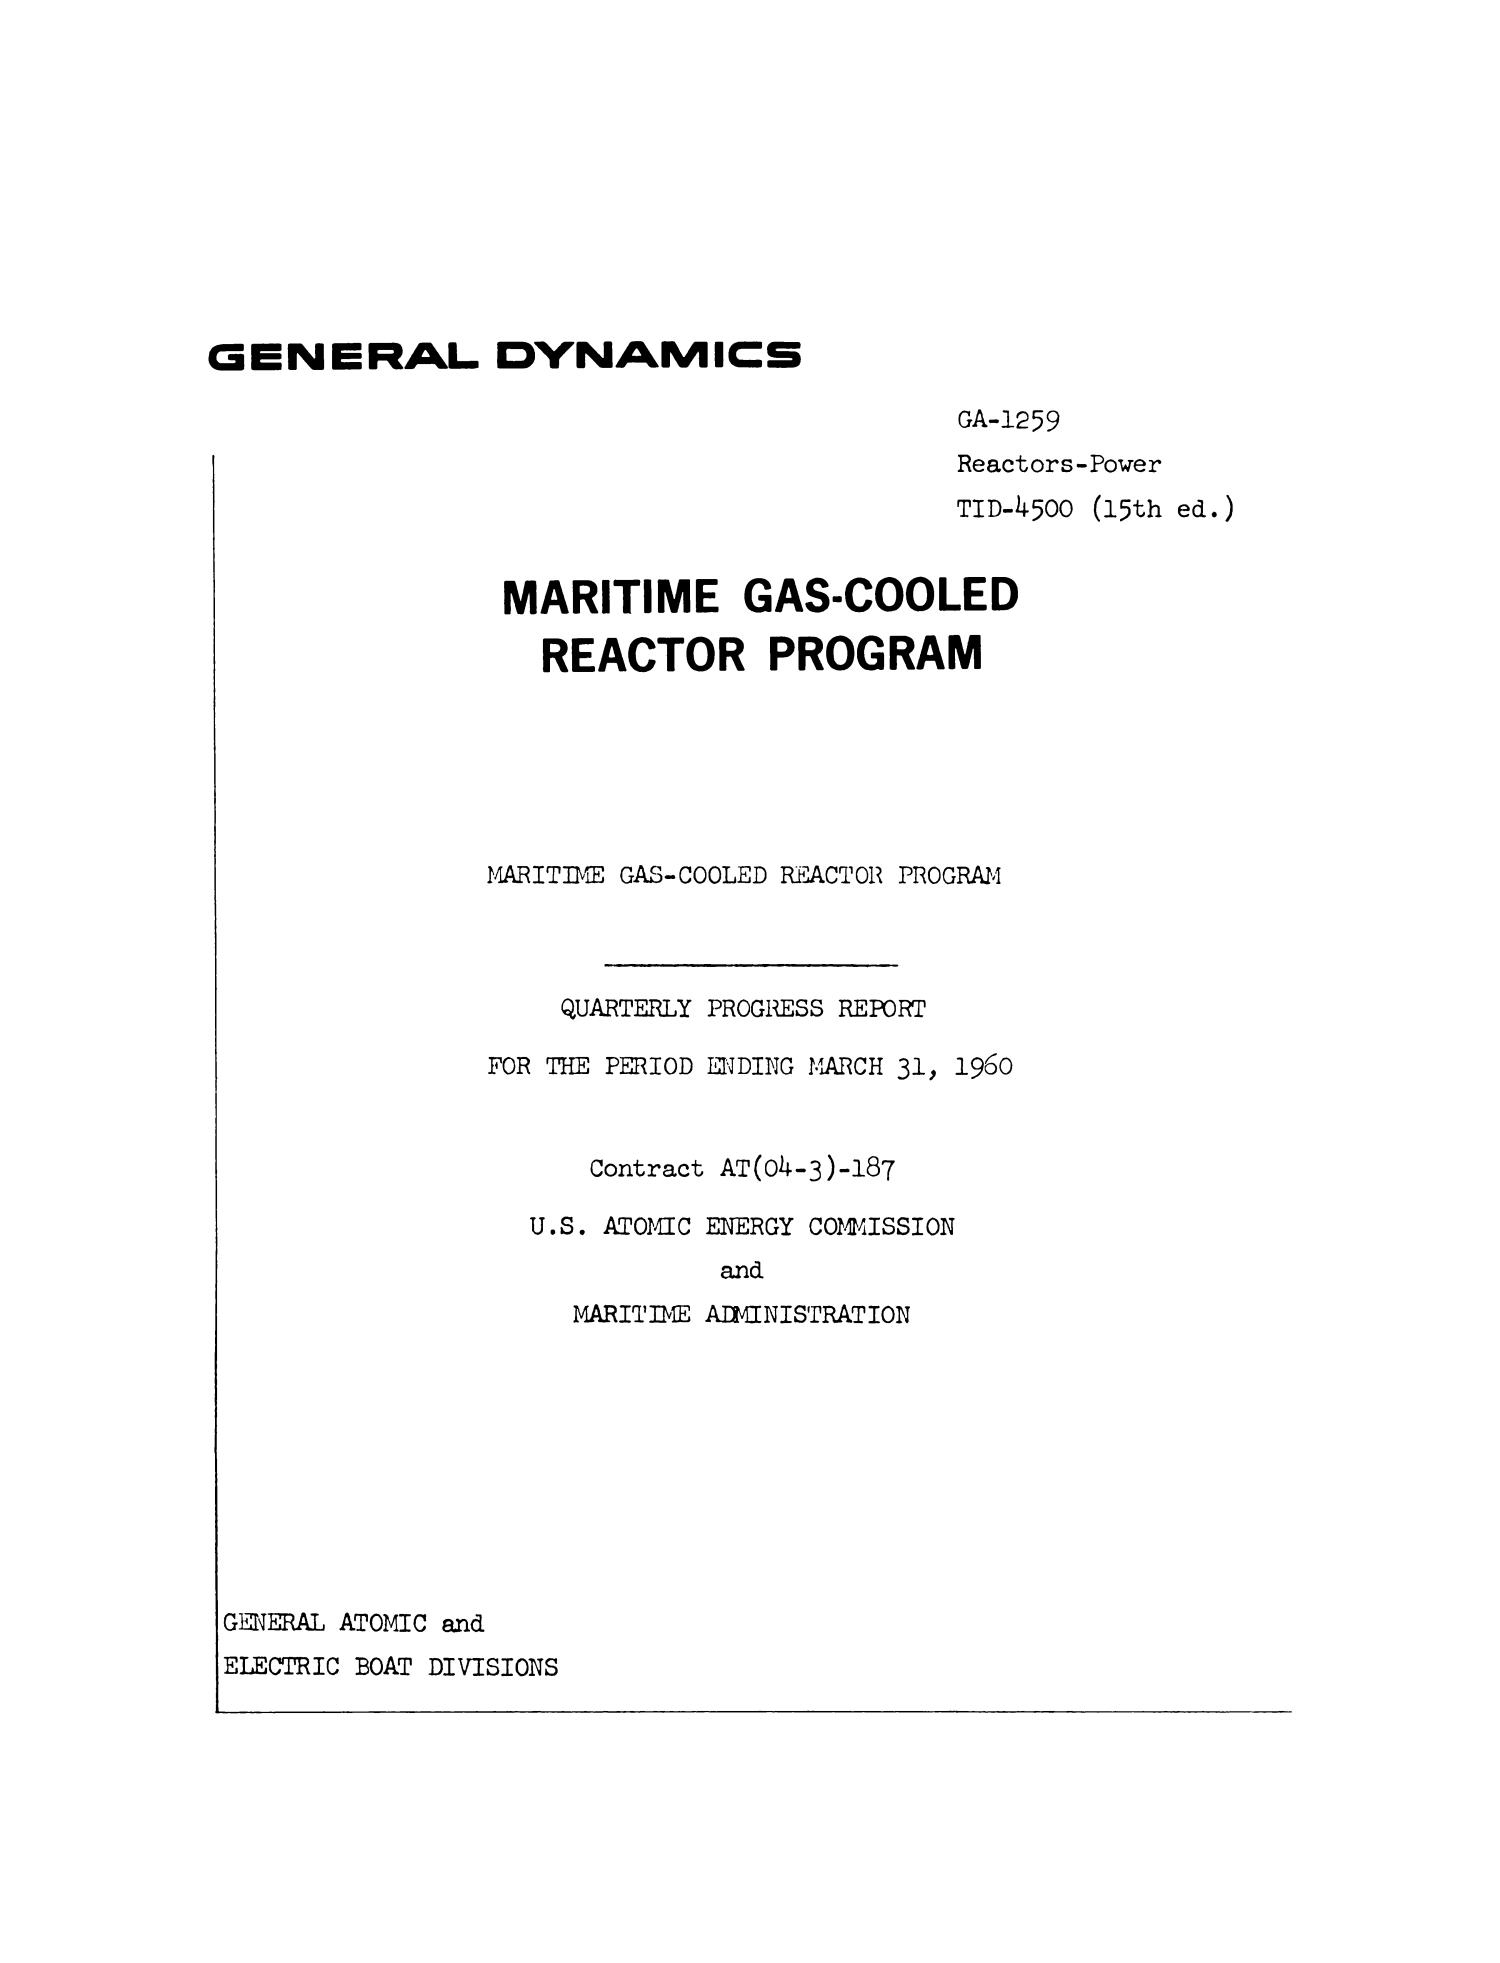 Maritime Gas-Cooled Reactor Program, Quarterly Progress Report: January-March 1960
                                                
                                                    Title Page
                                                